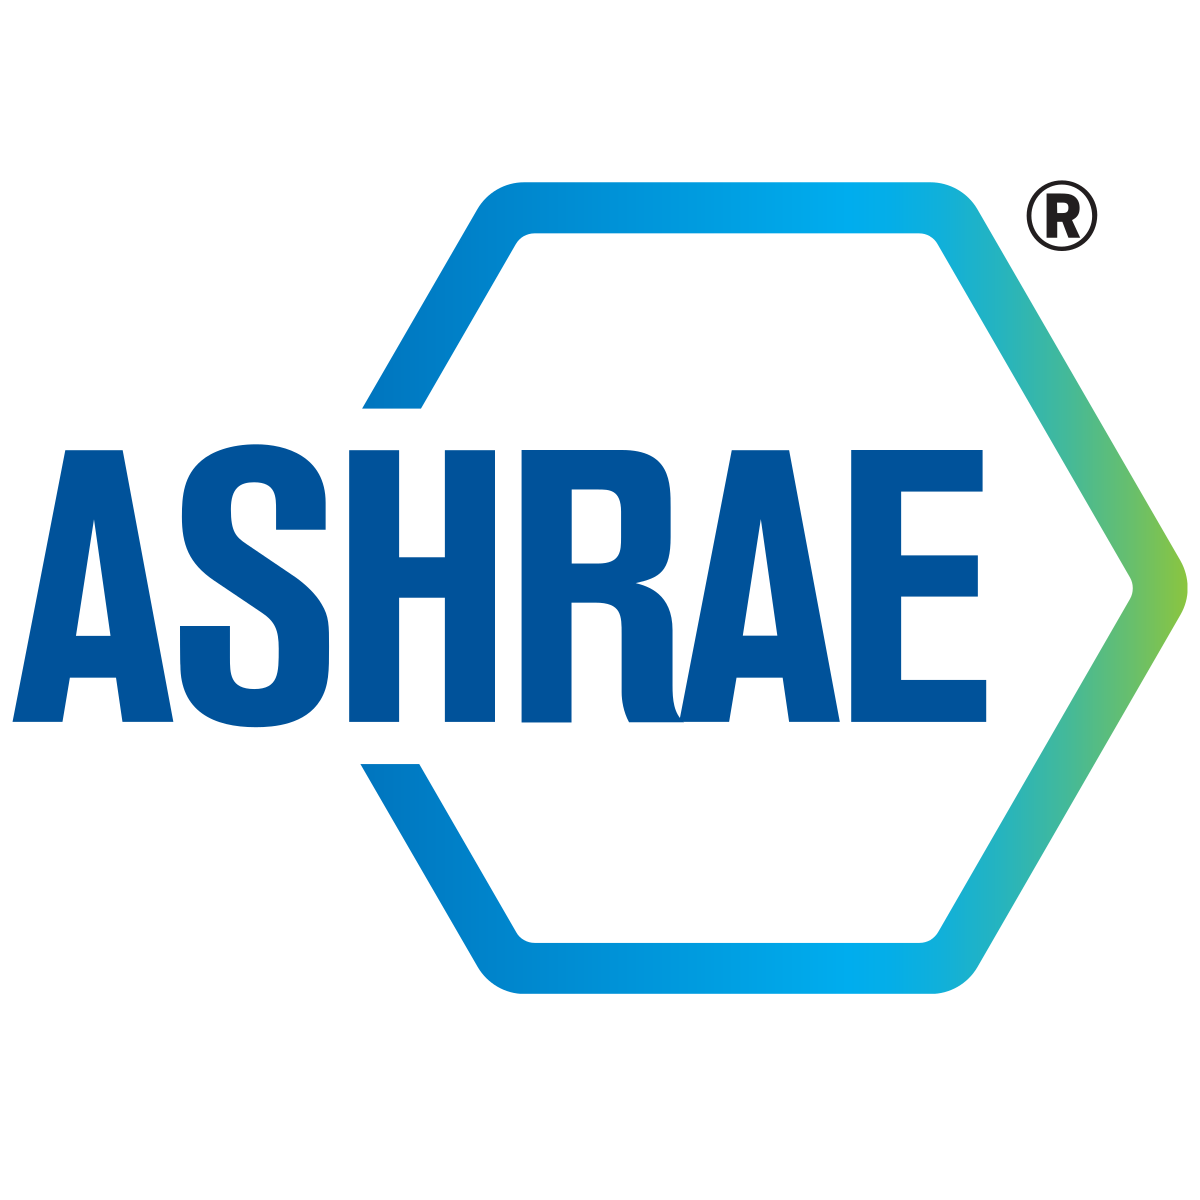 American Society of Heating, Refrigerating and Air Conditioning Engineers (ASHRAE)